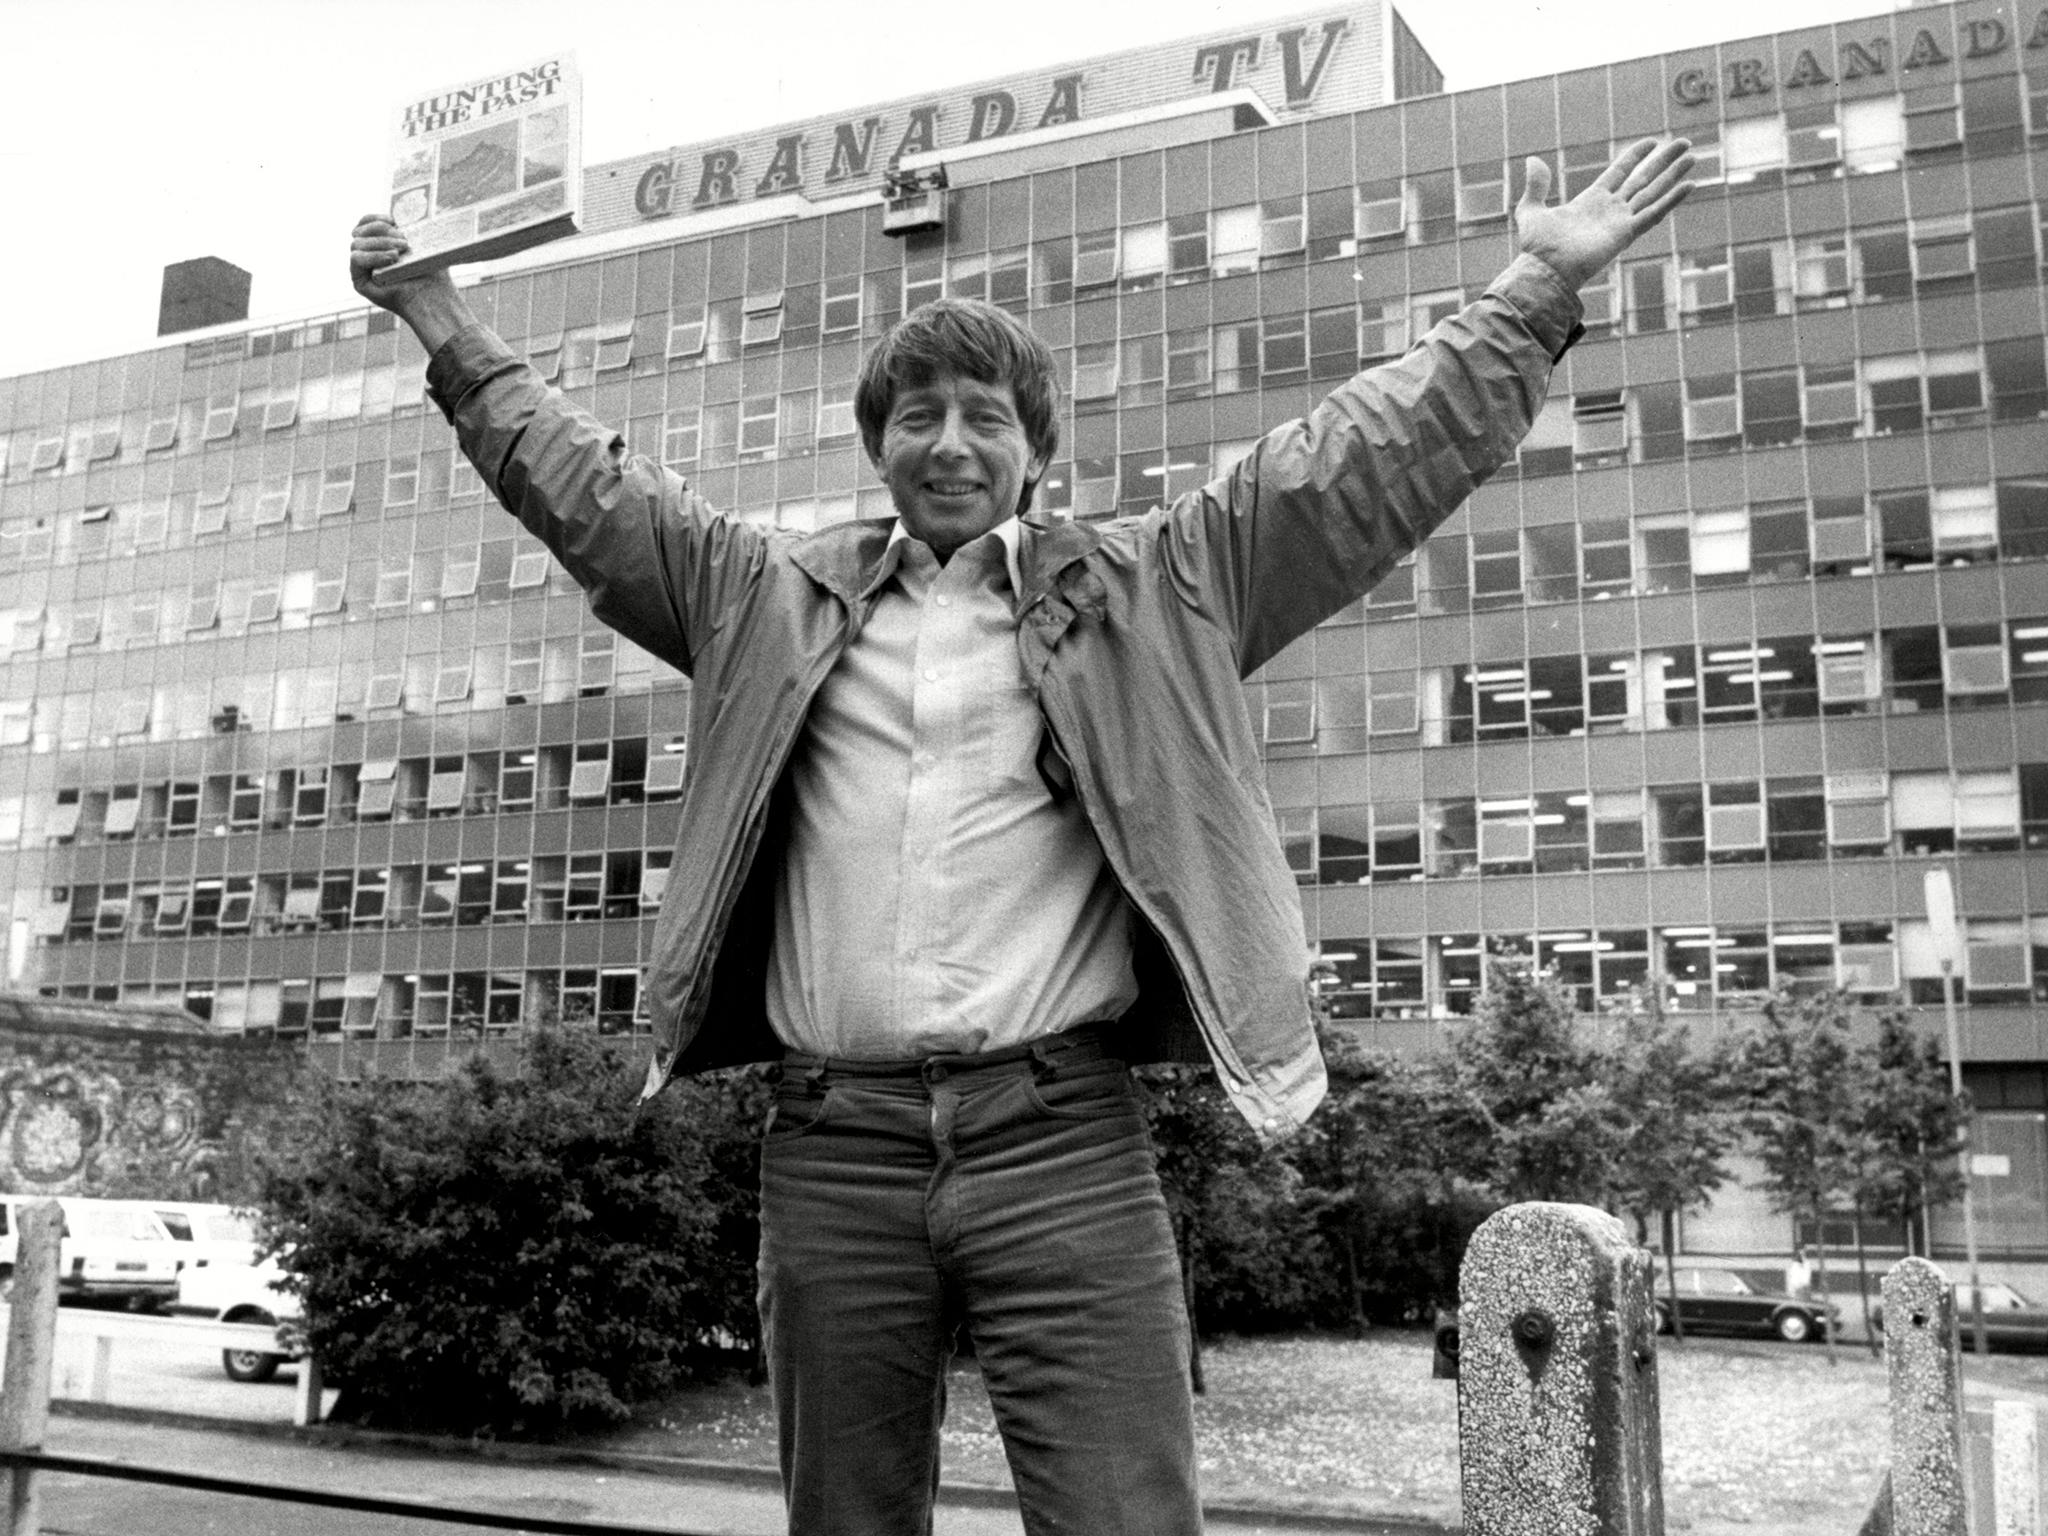 John Noakes was everyone’s favourite presenter in the 1970s. It’s a shock to realise the eternal boy scout is now an octogenarian suffering from dementia